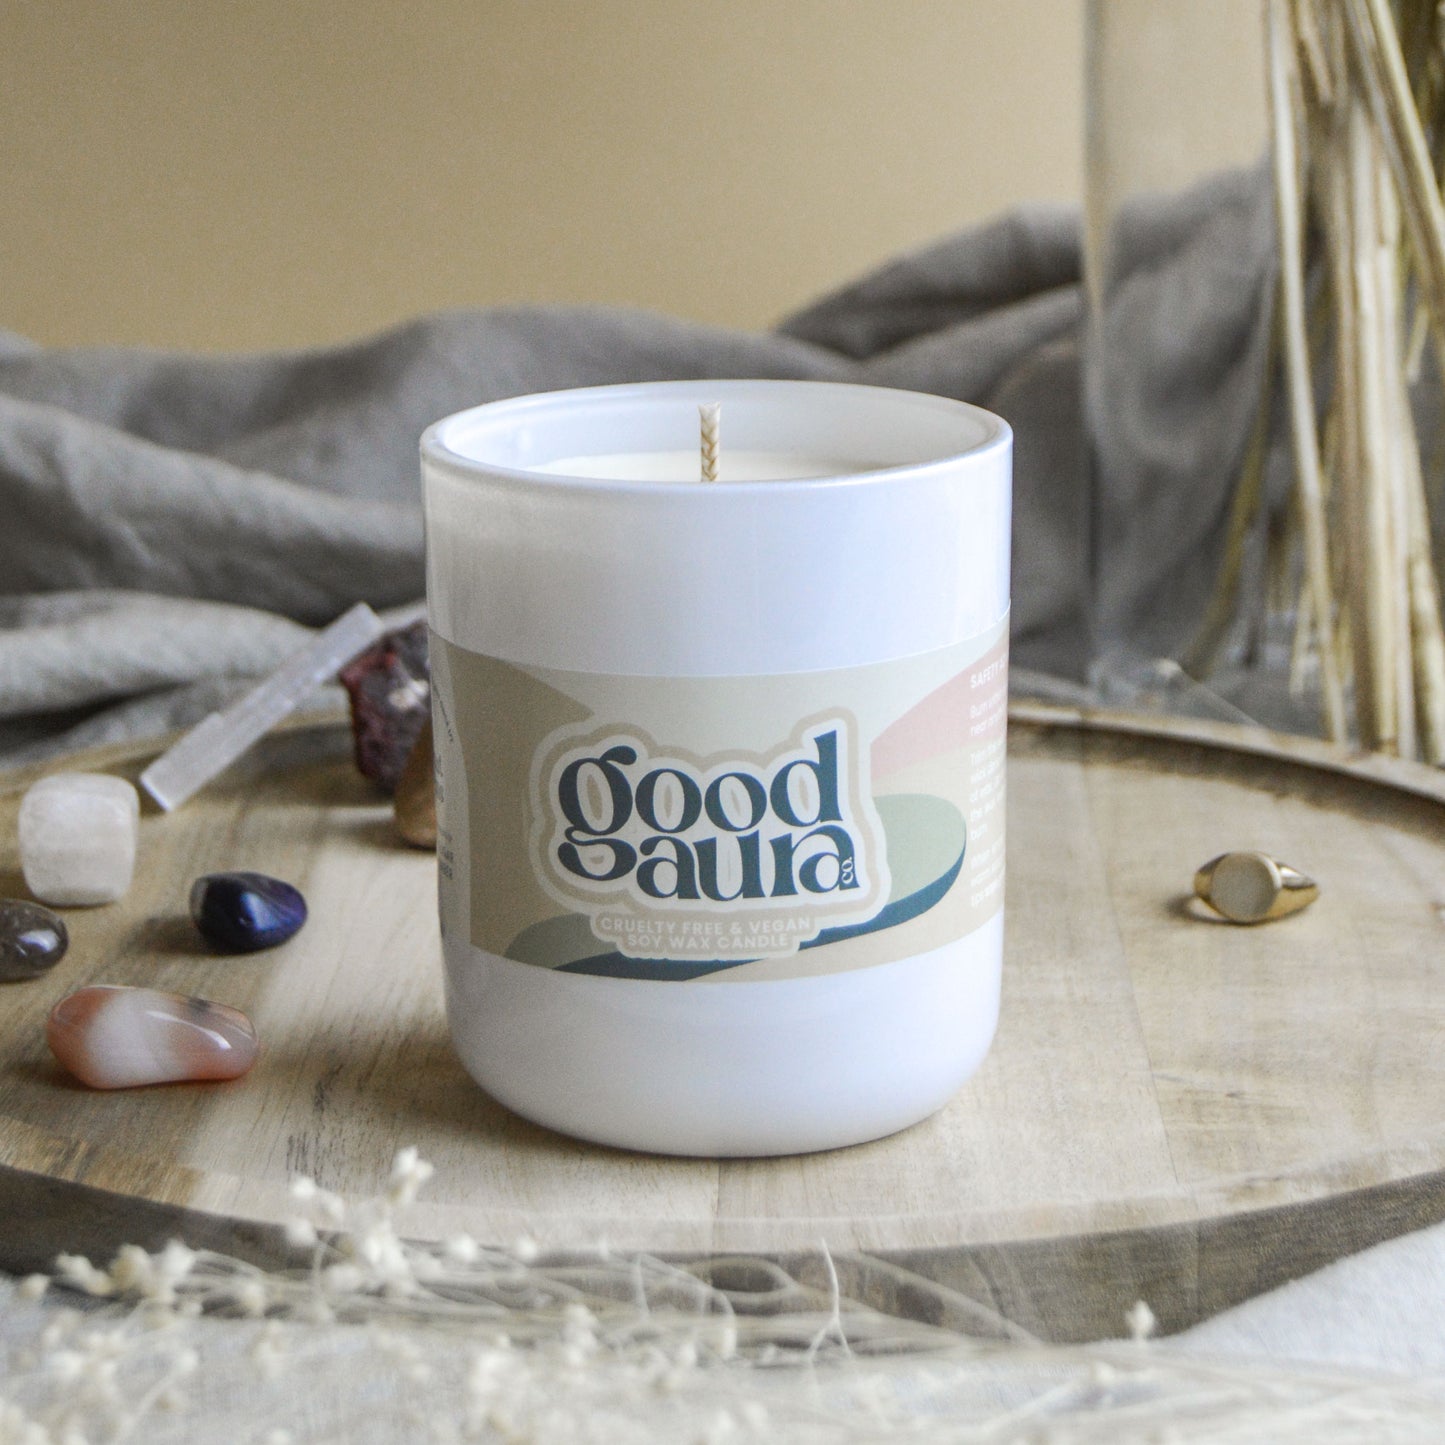 Coconut Dreams | White Curved Large Vegan Glass Refillable Candle